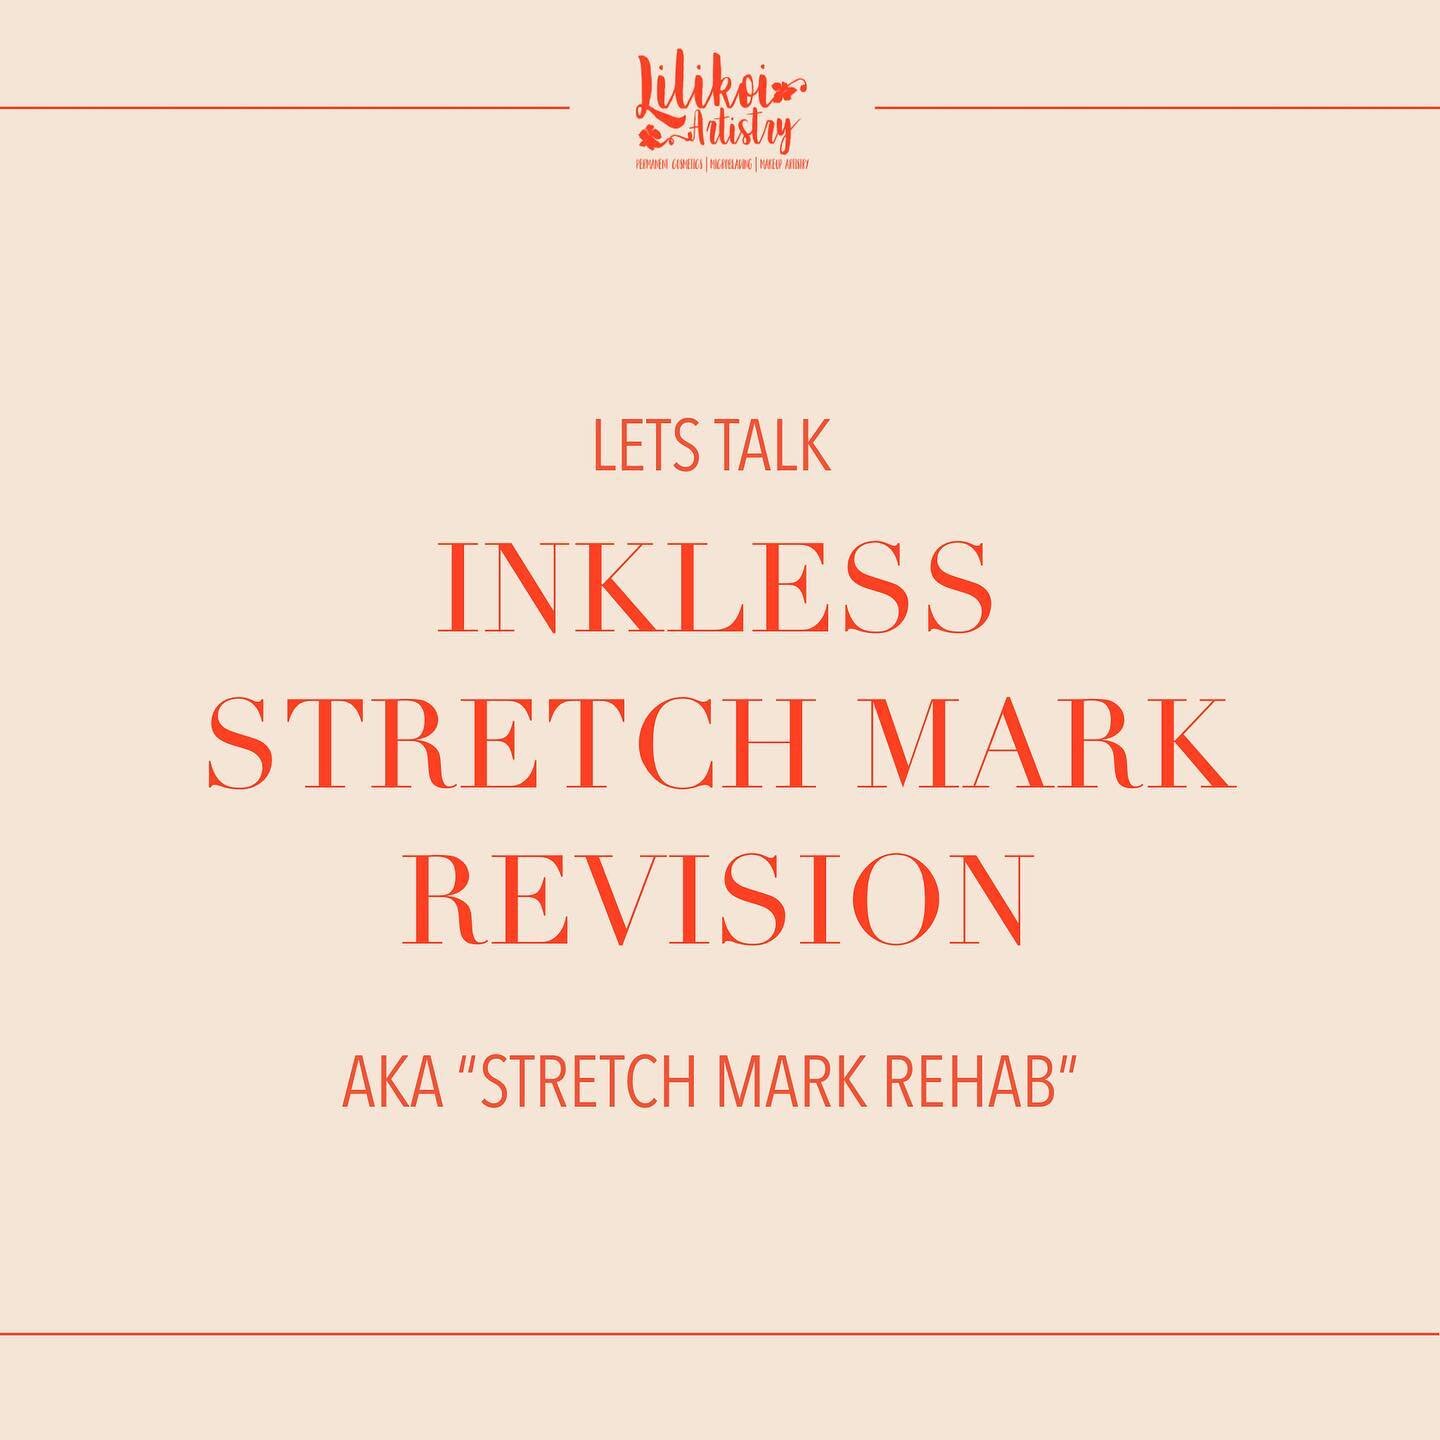 INKLESS STRETCHMARK REVISION

New service offered by Lilikoi Artistry!

I&rsquo;m sure you have a ton of questions so let&rsquo;s answer a few!

-What does the procedure involve? 
Angie will use a machine to open the skin in the area you wish to have